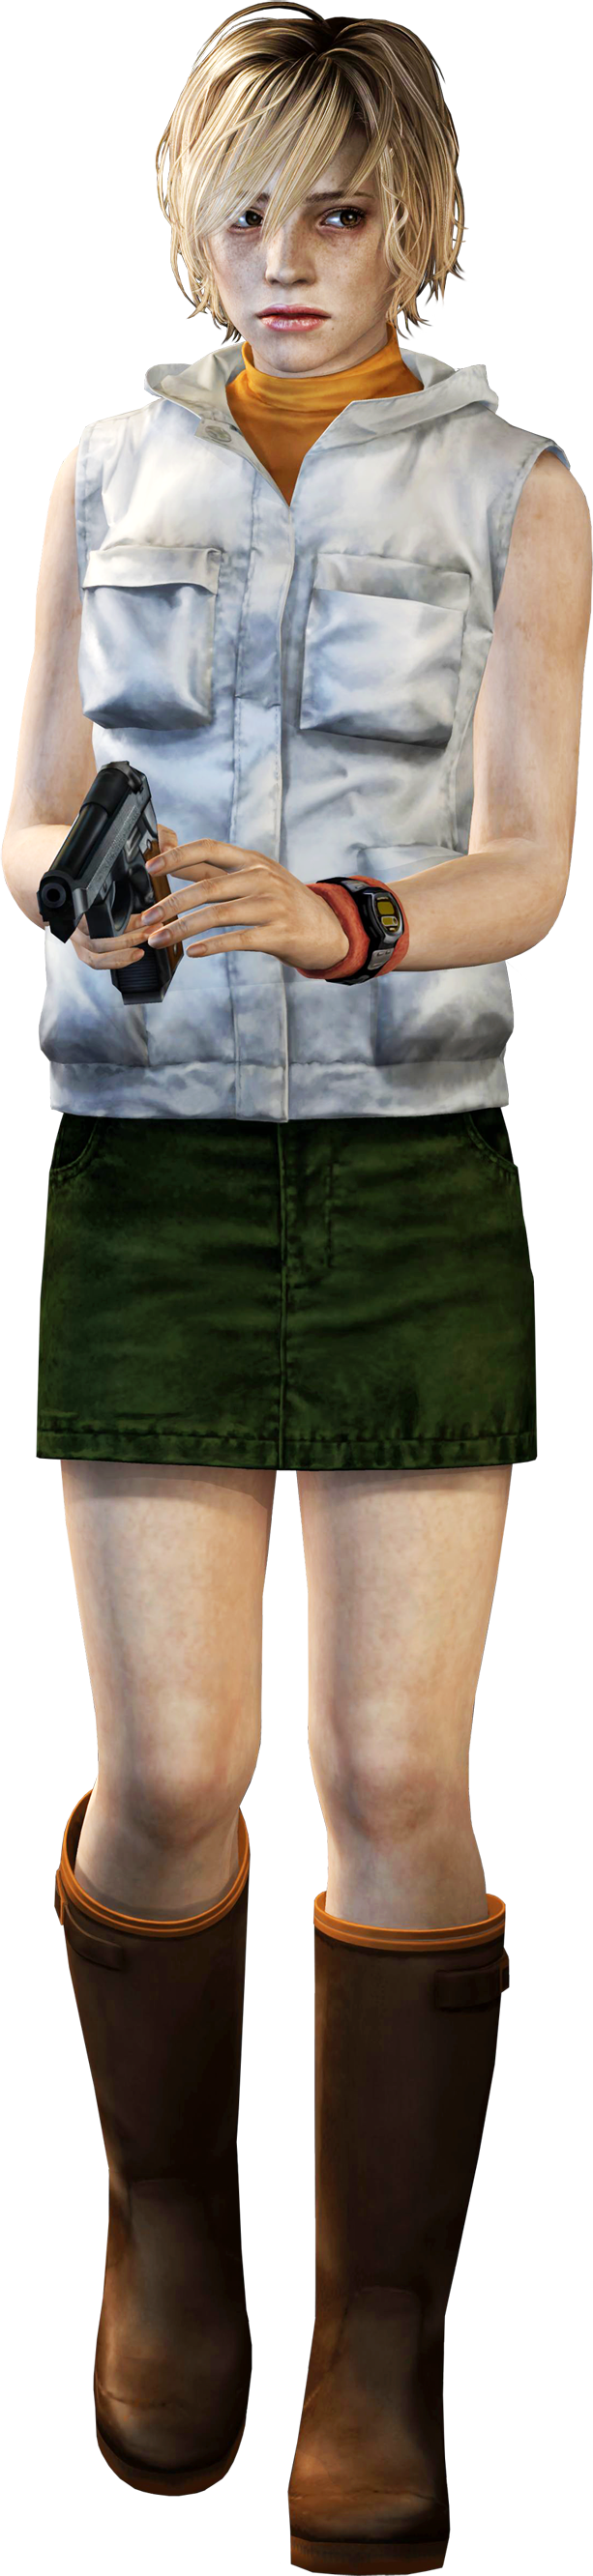 Ashley from RE4 in Heather Mason Outfit : r/silenthill